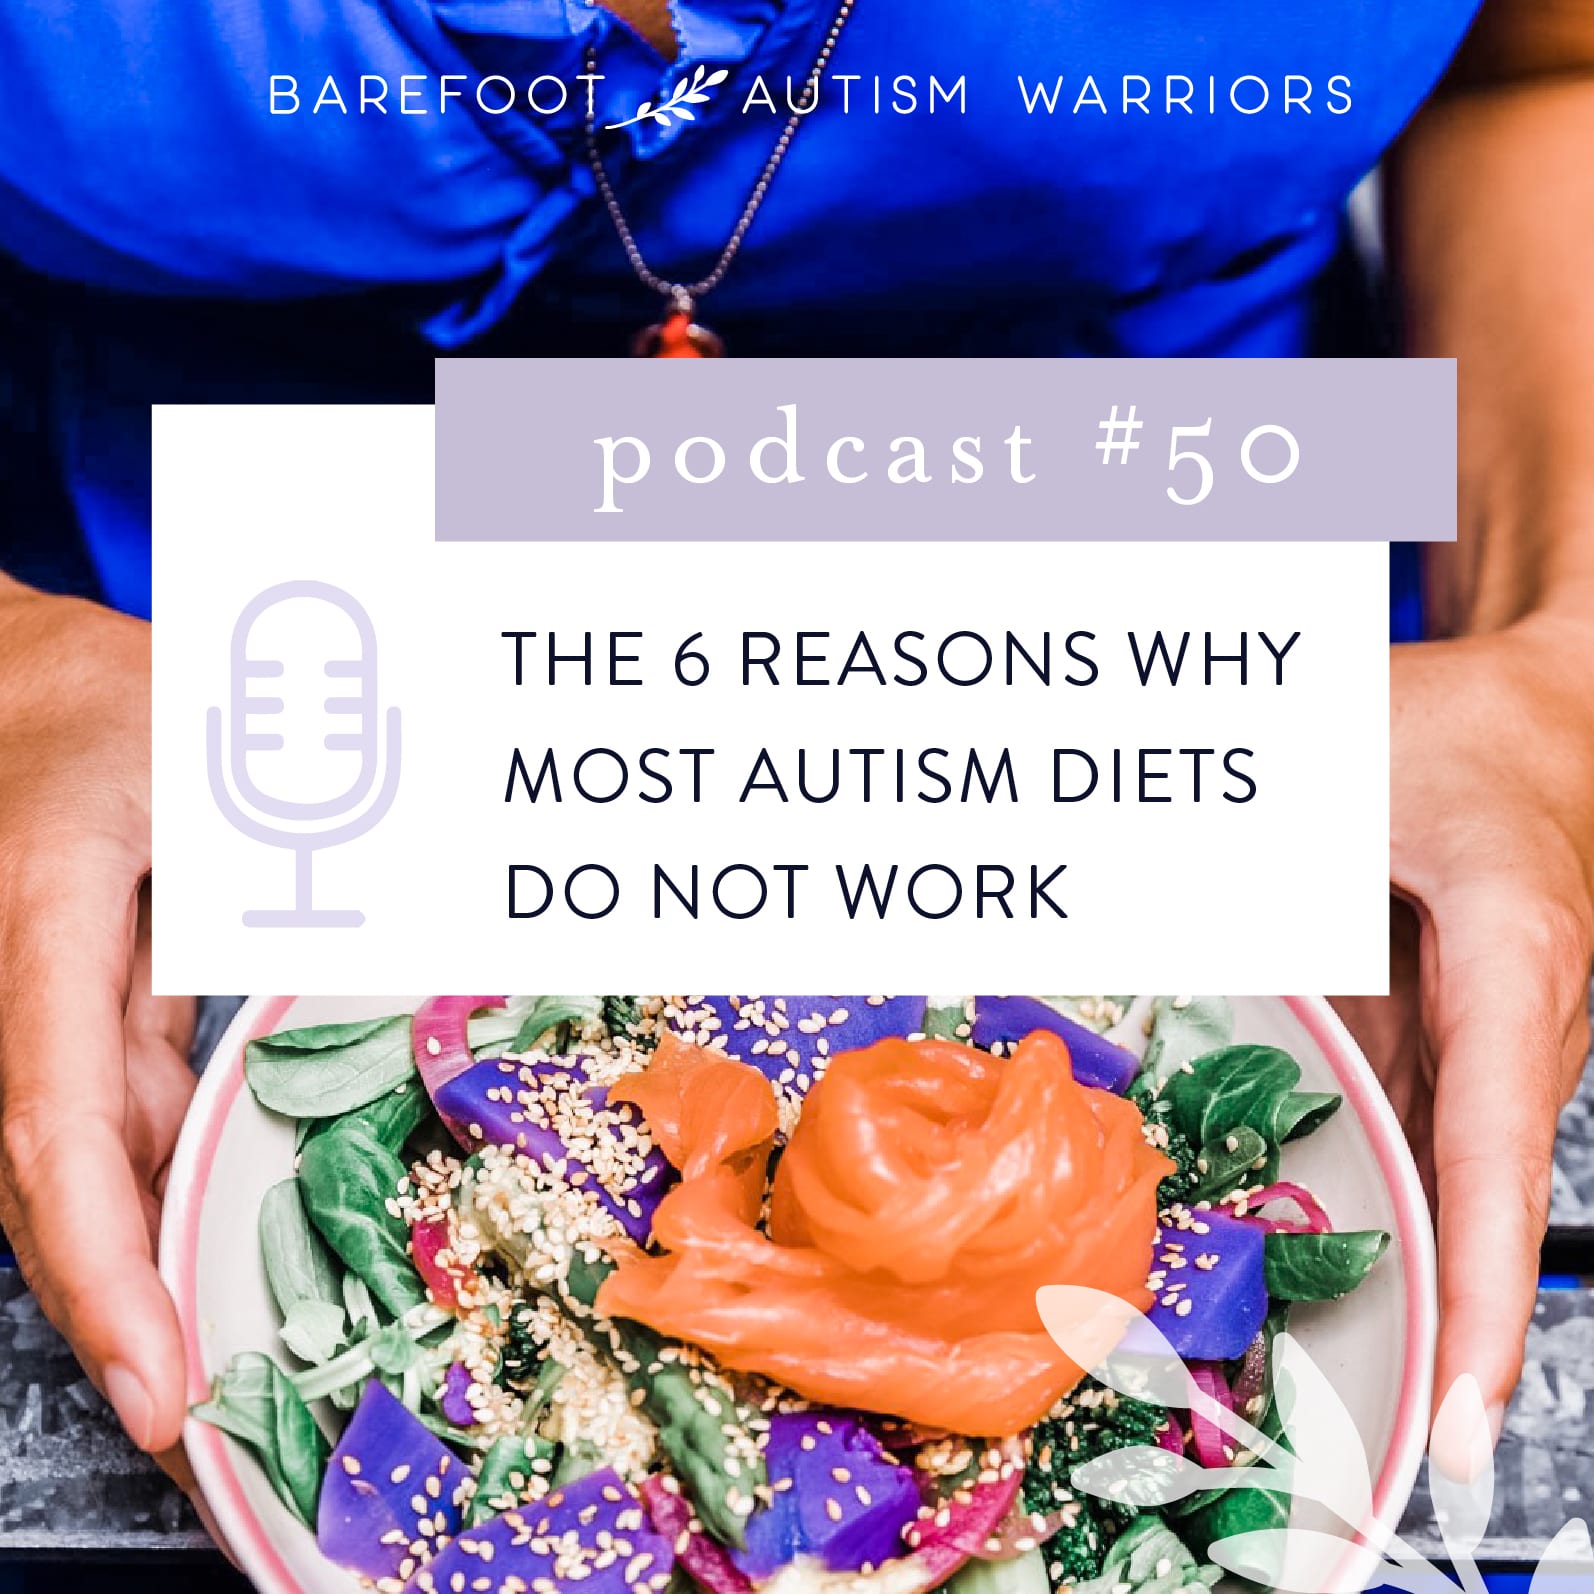 THE 6 REASONS WHY MOST AUTISM DIETS DO NOT WORK